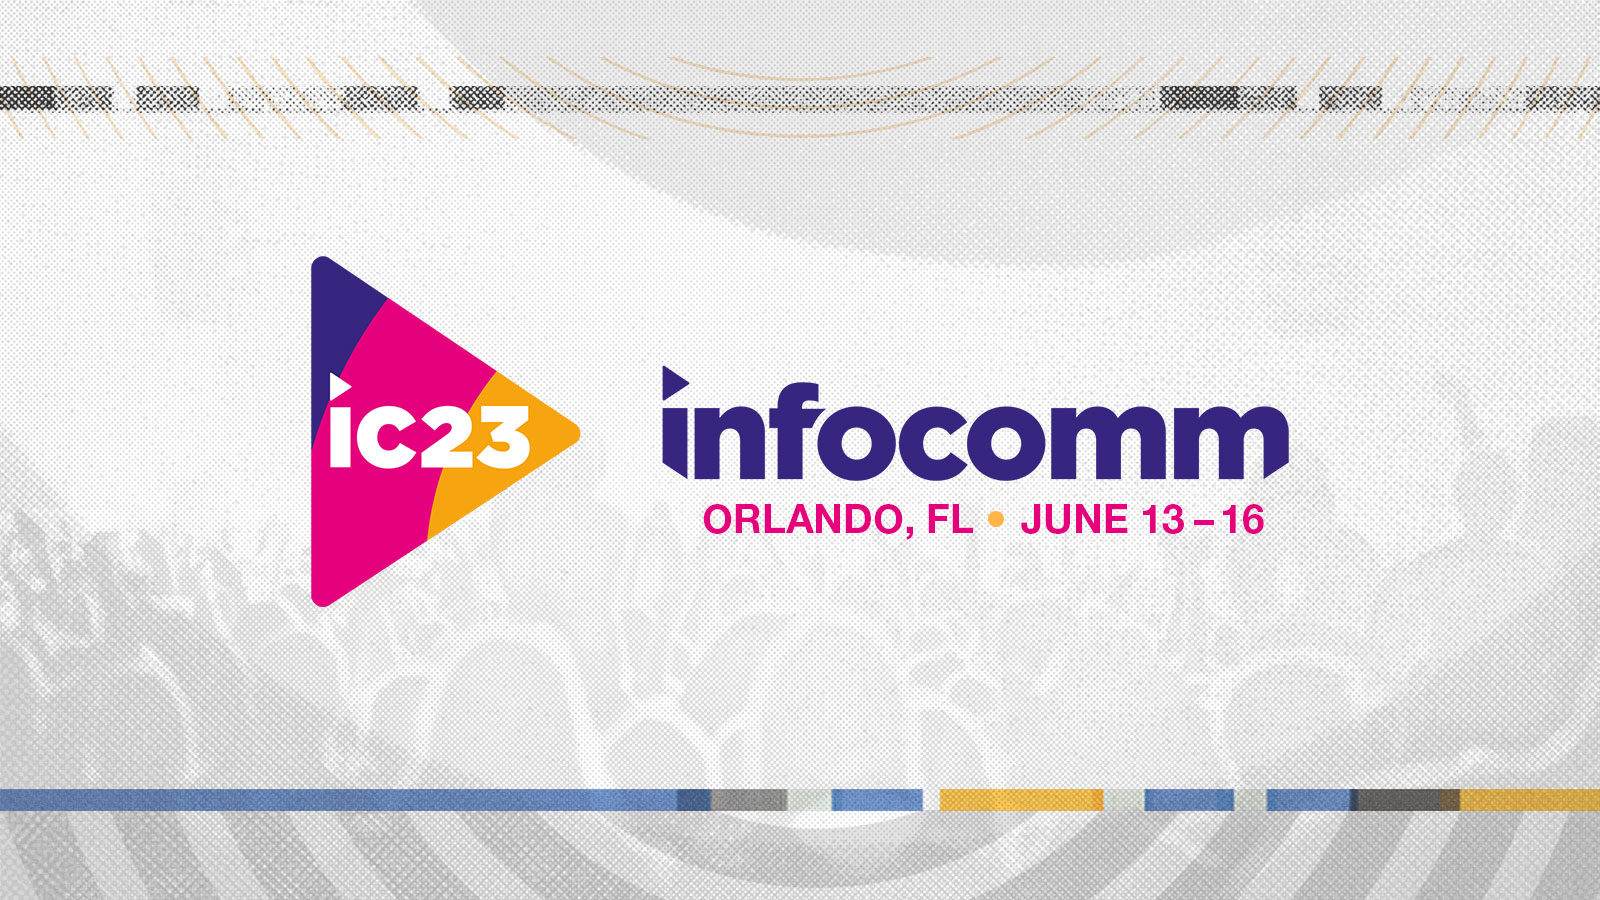 Constellation by Meyer Sound Billed as Star Attraction at InfoComm 2023